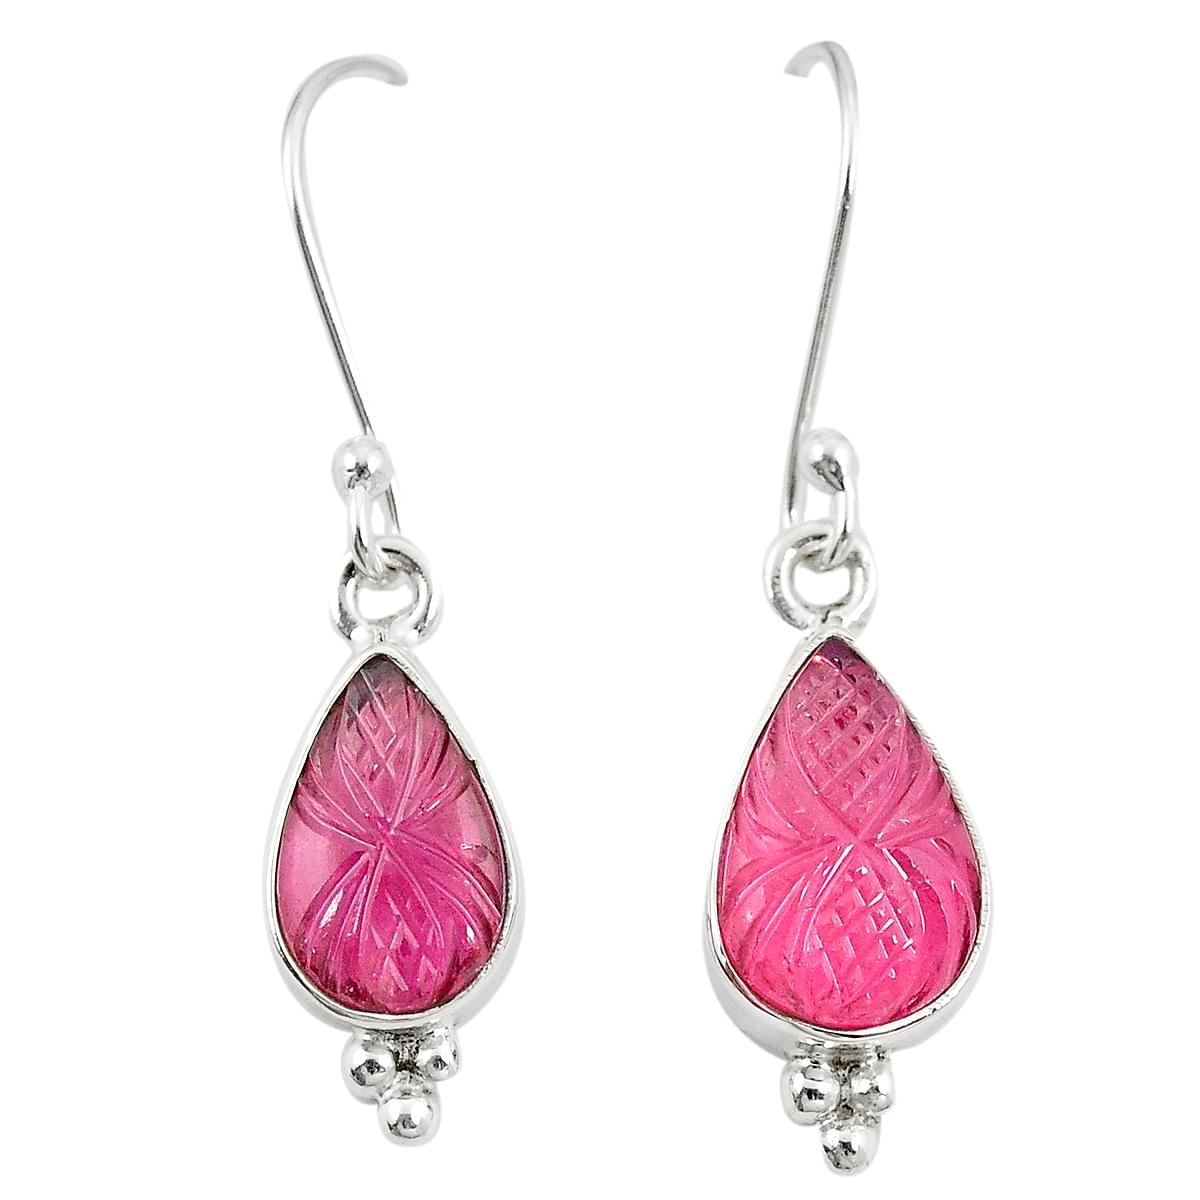 Pink Tourmaline carvings 925 sterling silver earrings Tourmaline jewellery Tourmaline carvings earrings Tourmaline silver earrings